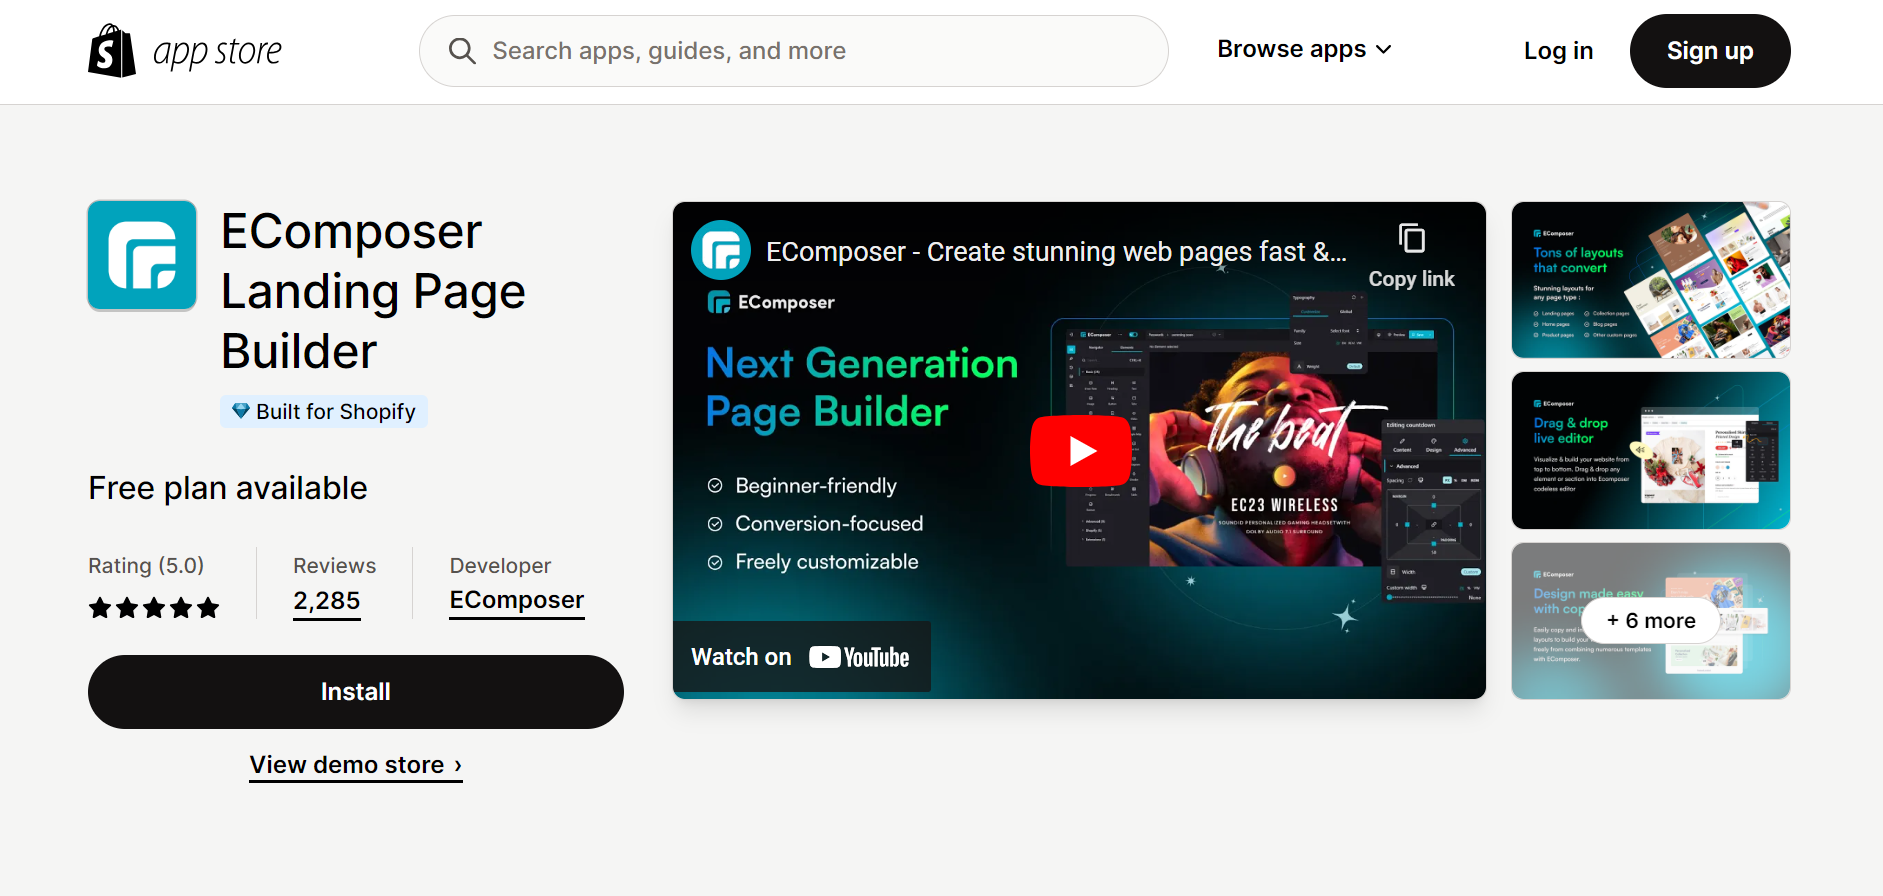 EComposer, the Landing Page Builder app